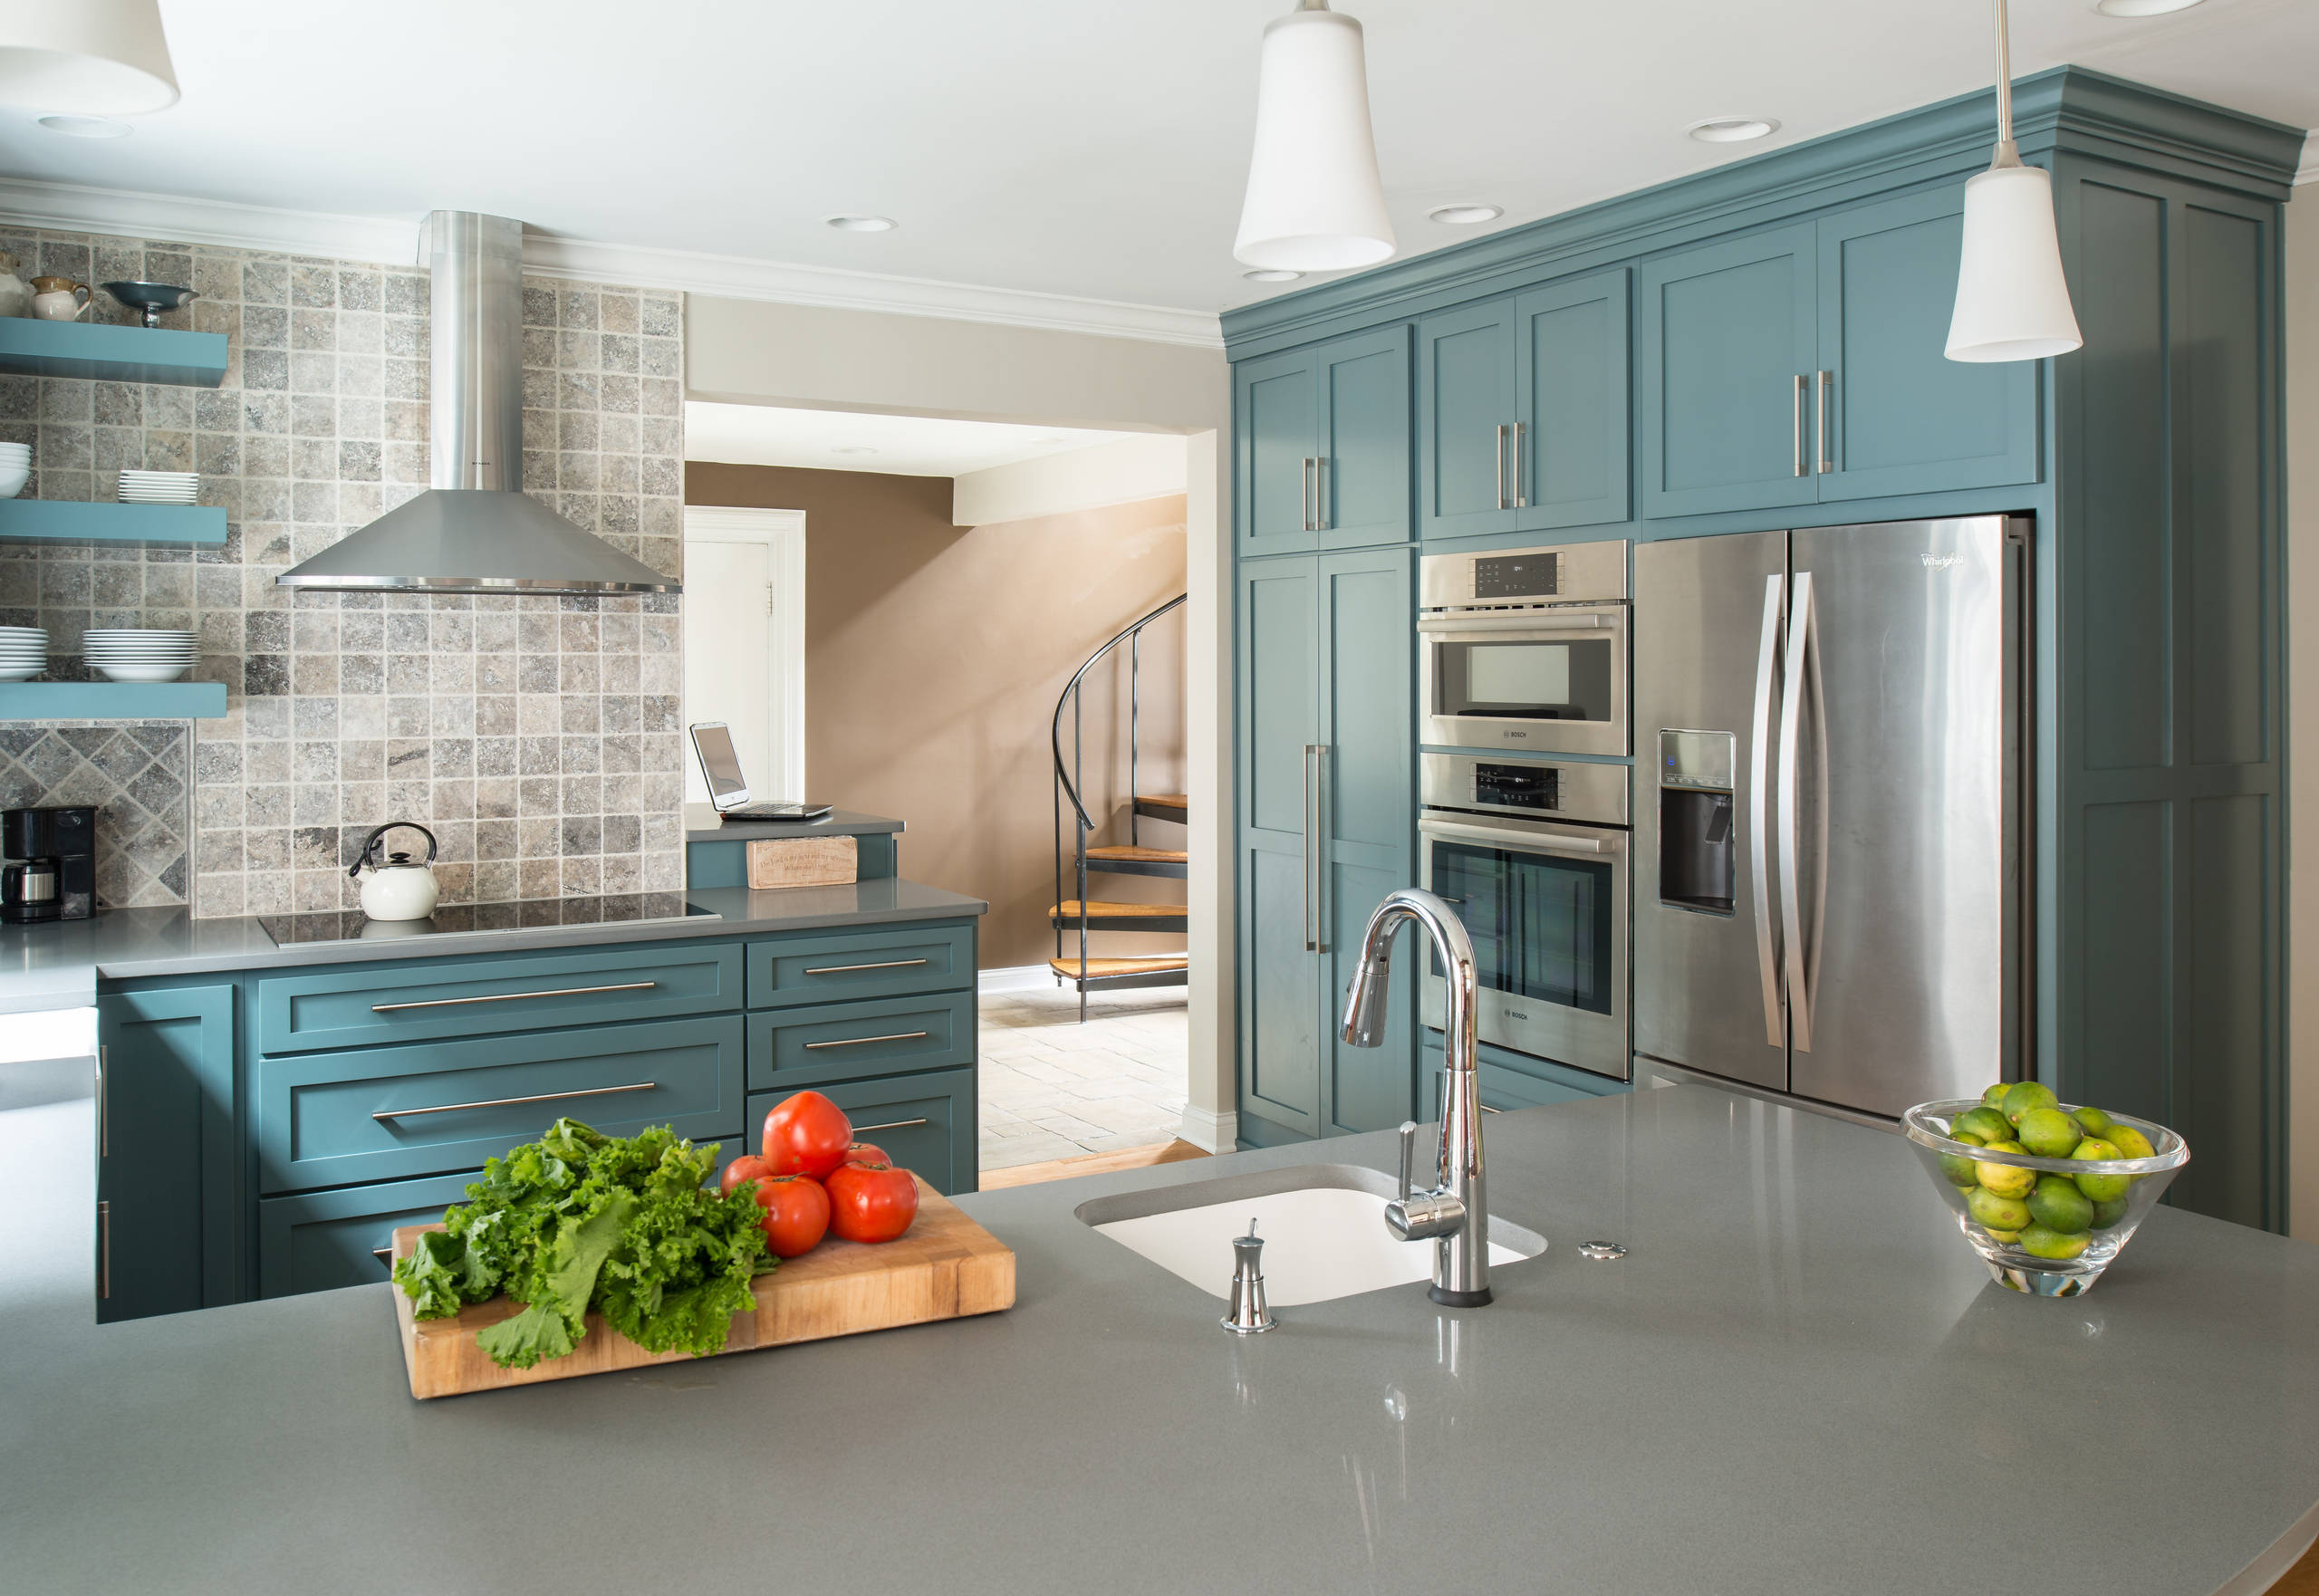 The Ultimate Guide To Spice Kitchens - Laurysen Kitchens